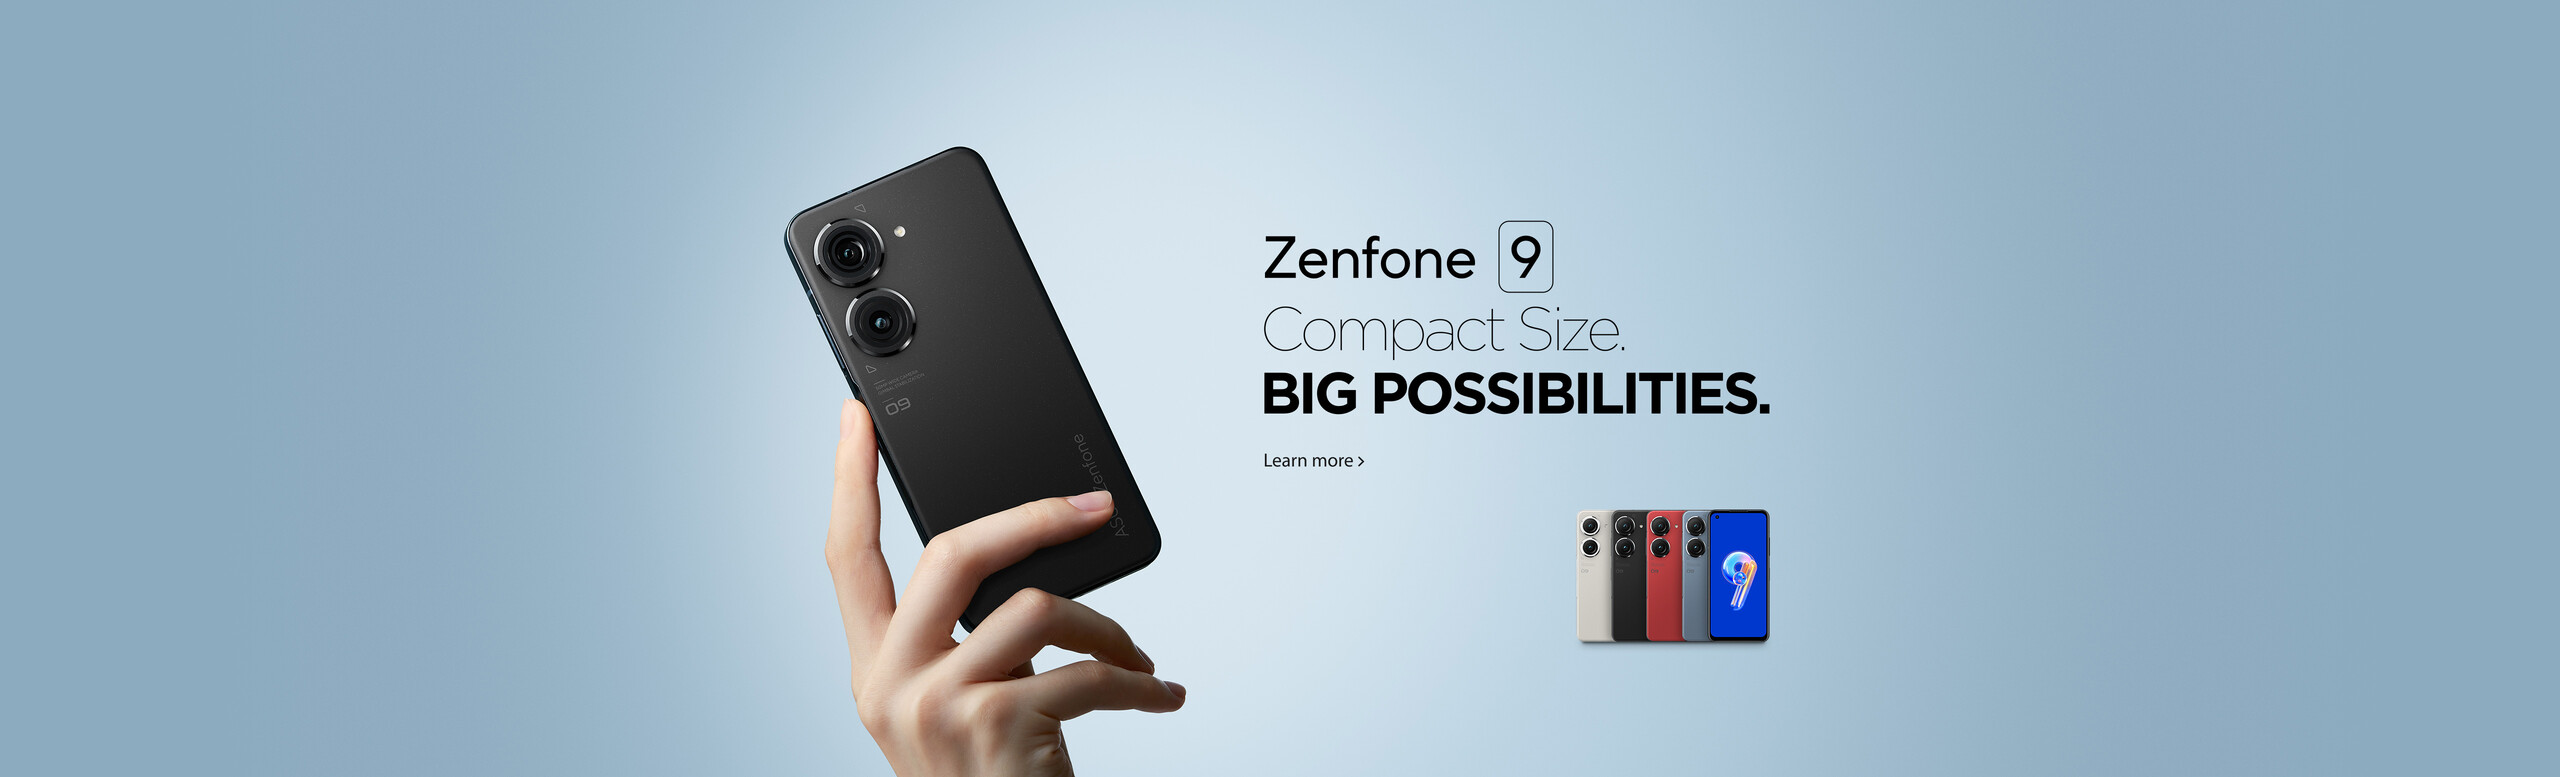 The right hand holding the Zenfone 9 displays its back cover in Midnight Black, and there are five Zenfone 9 on the right down side showing 4 colors and the phone's front side.